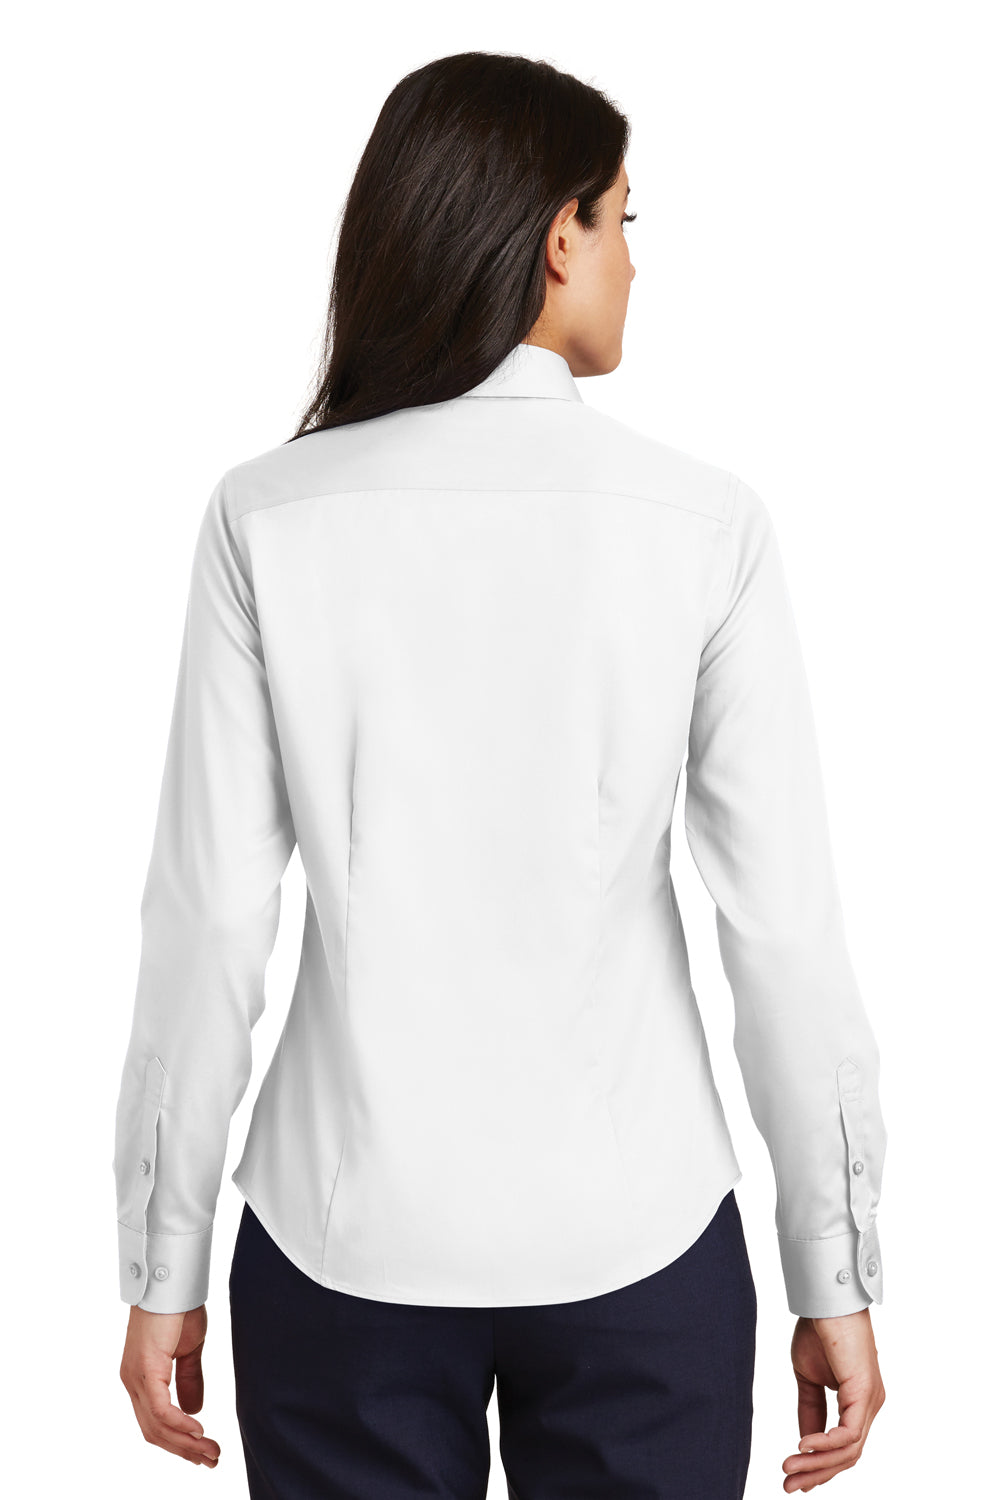 Port Authority L638 Womens Wrinkle Resistant Long Sleeve Button Down Shirt White Back